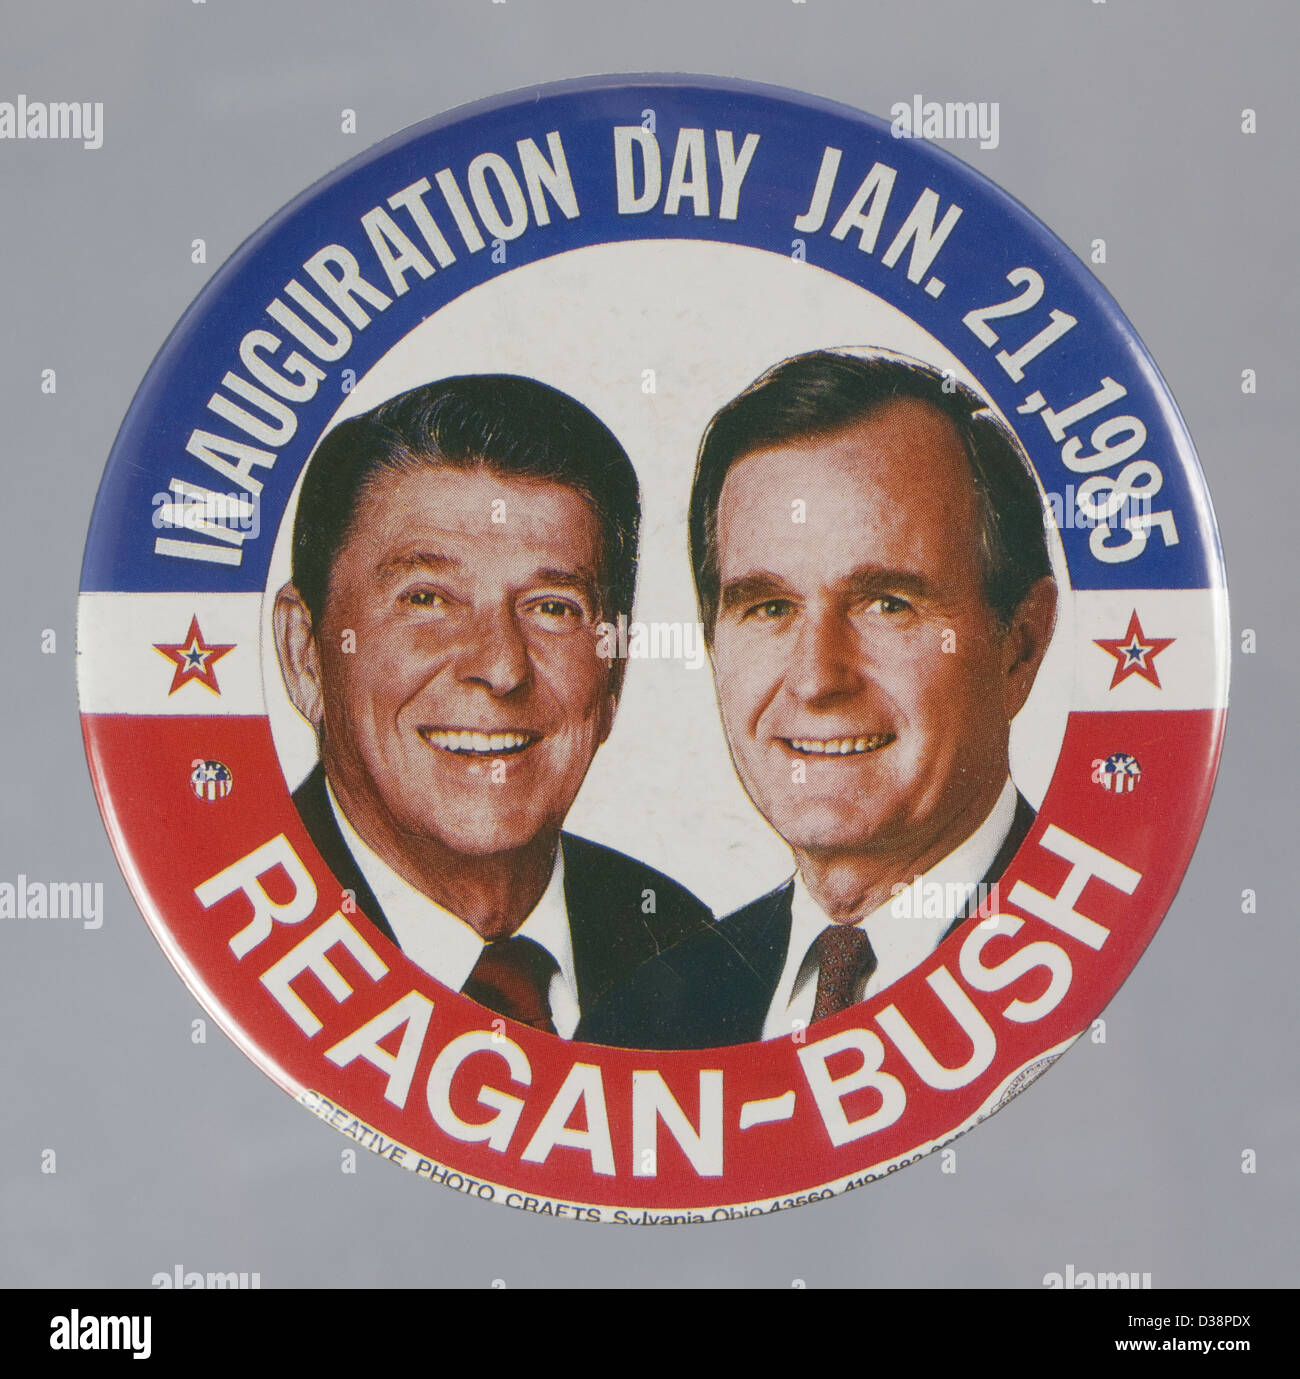 1984 U.S. presidential campaign button pin showing Ronald Reagan and George H. W. Bush Stock Photo